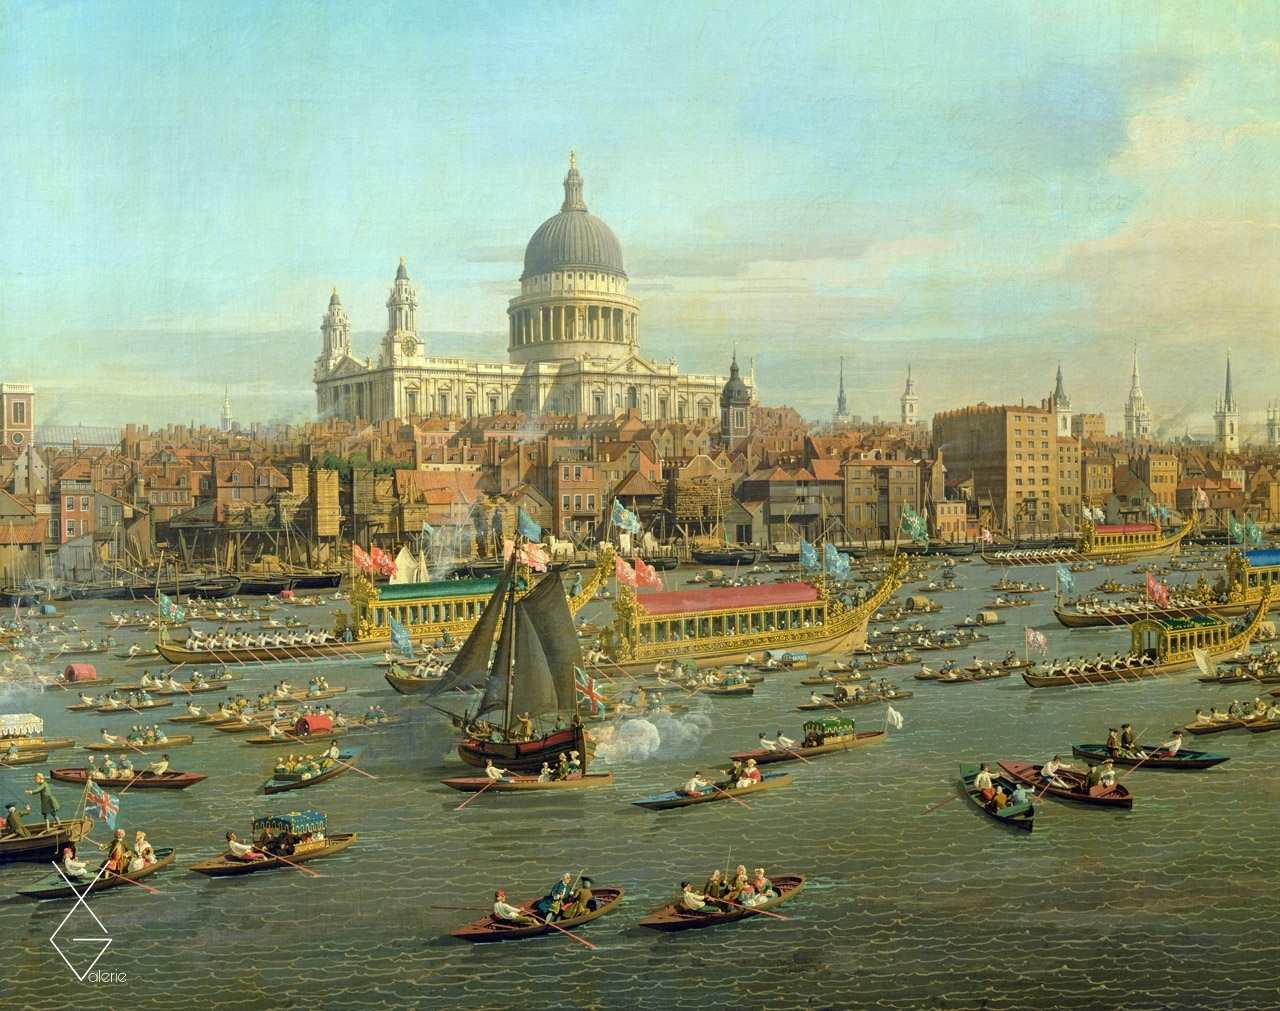 Tranh The River Thames with St. Paul's Cathedral on Lord Mayor's Day, detail of St. Paul's Cathedral - 1747-1748 - Giovanni Antonio Canal